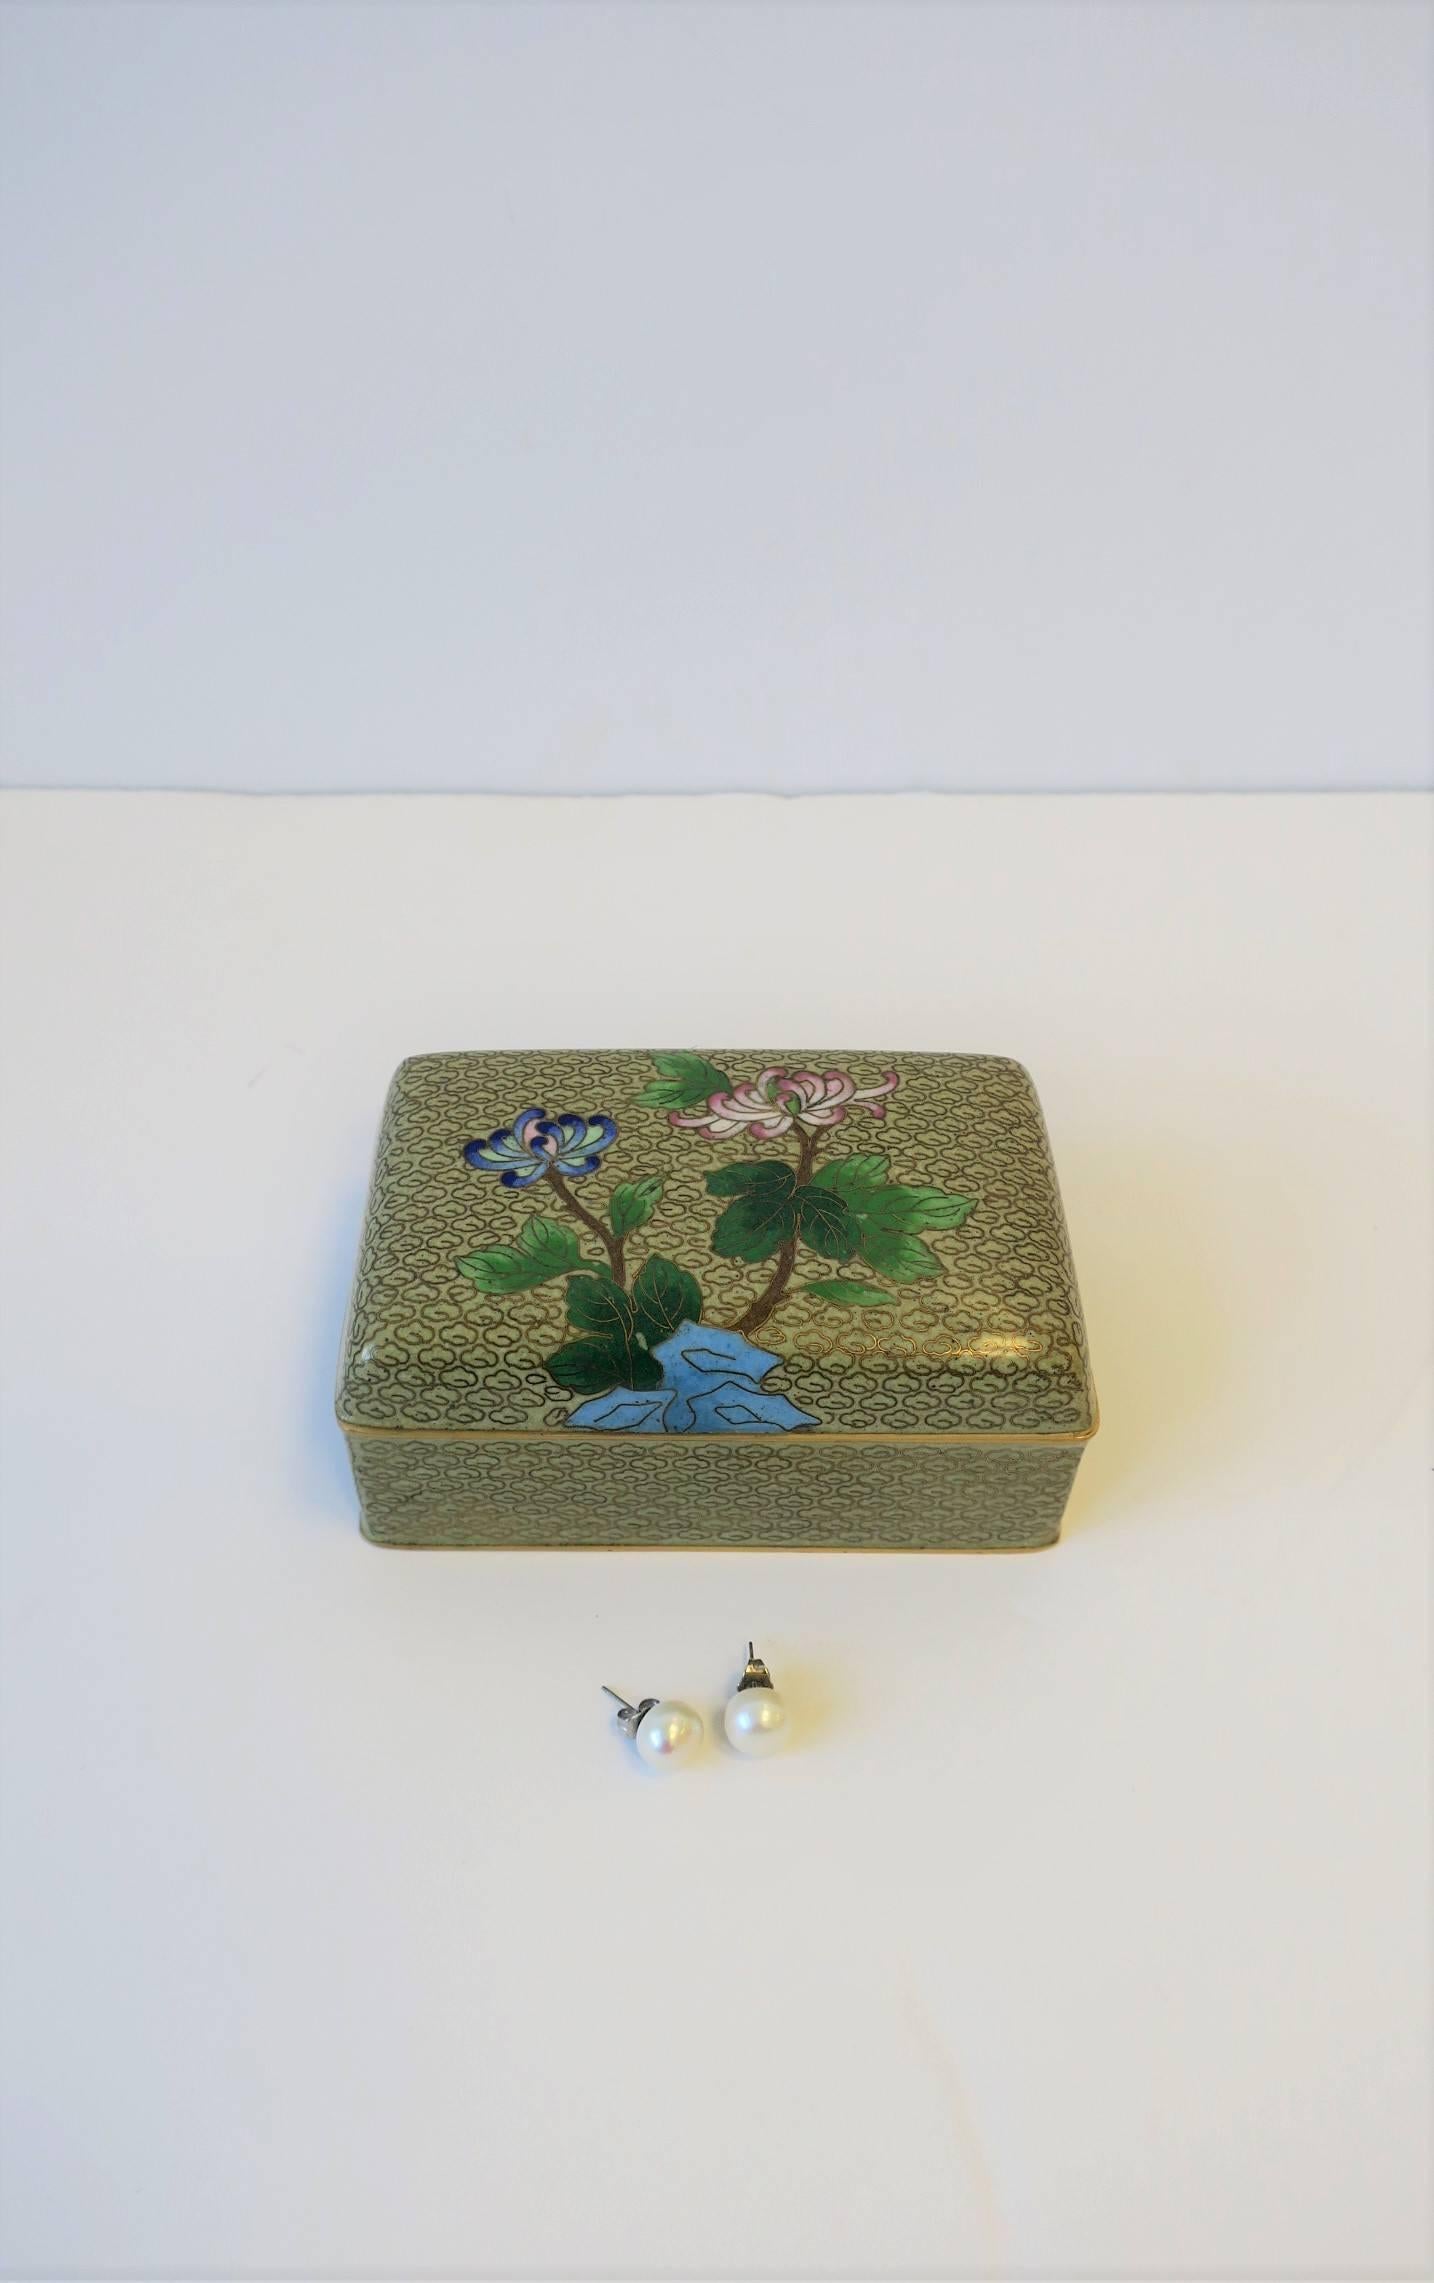 A beautiful vintage Chinese Cloisonné enamel and brass decorative desk, jewelry or trinket box. Two decorative mum flowers on front. Colors include: gold/brass, blue, white, pink, emerald green, brown and cream/sand hues. Excellent vintage